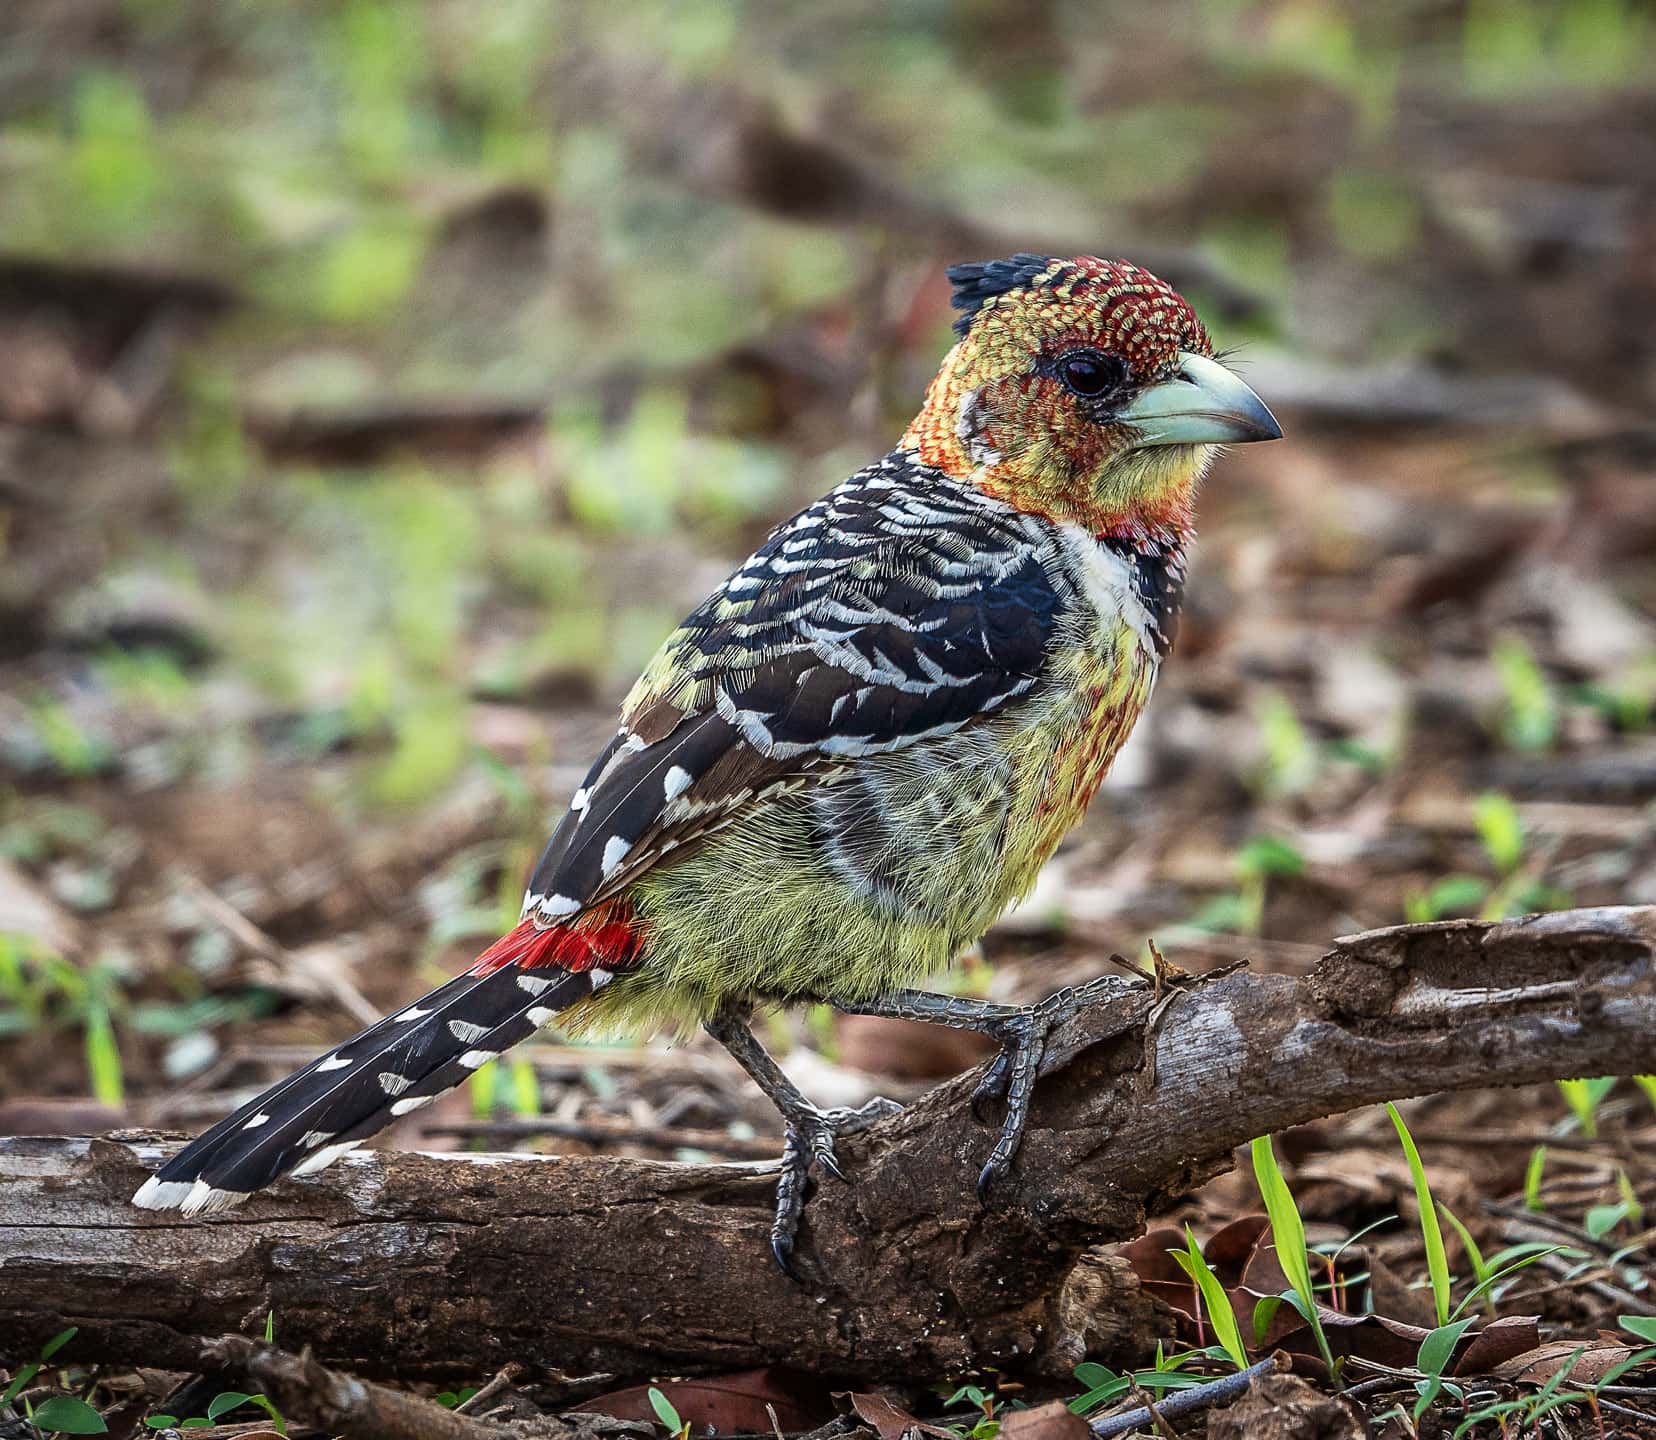 Small bird with yellow and black speckled chest black and white striped wings with a red stripe and red, yellow and orange coloured head stood on a branch near the ground